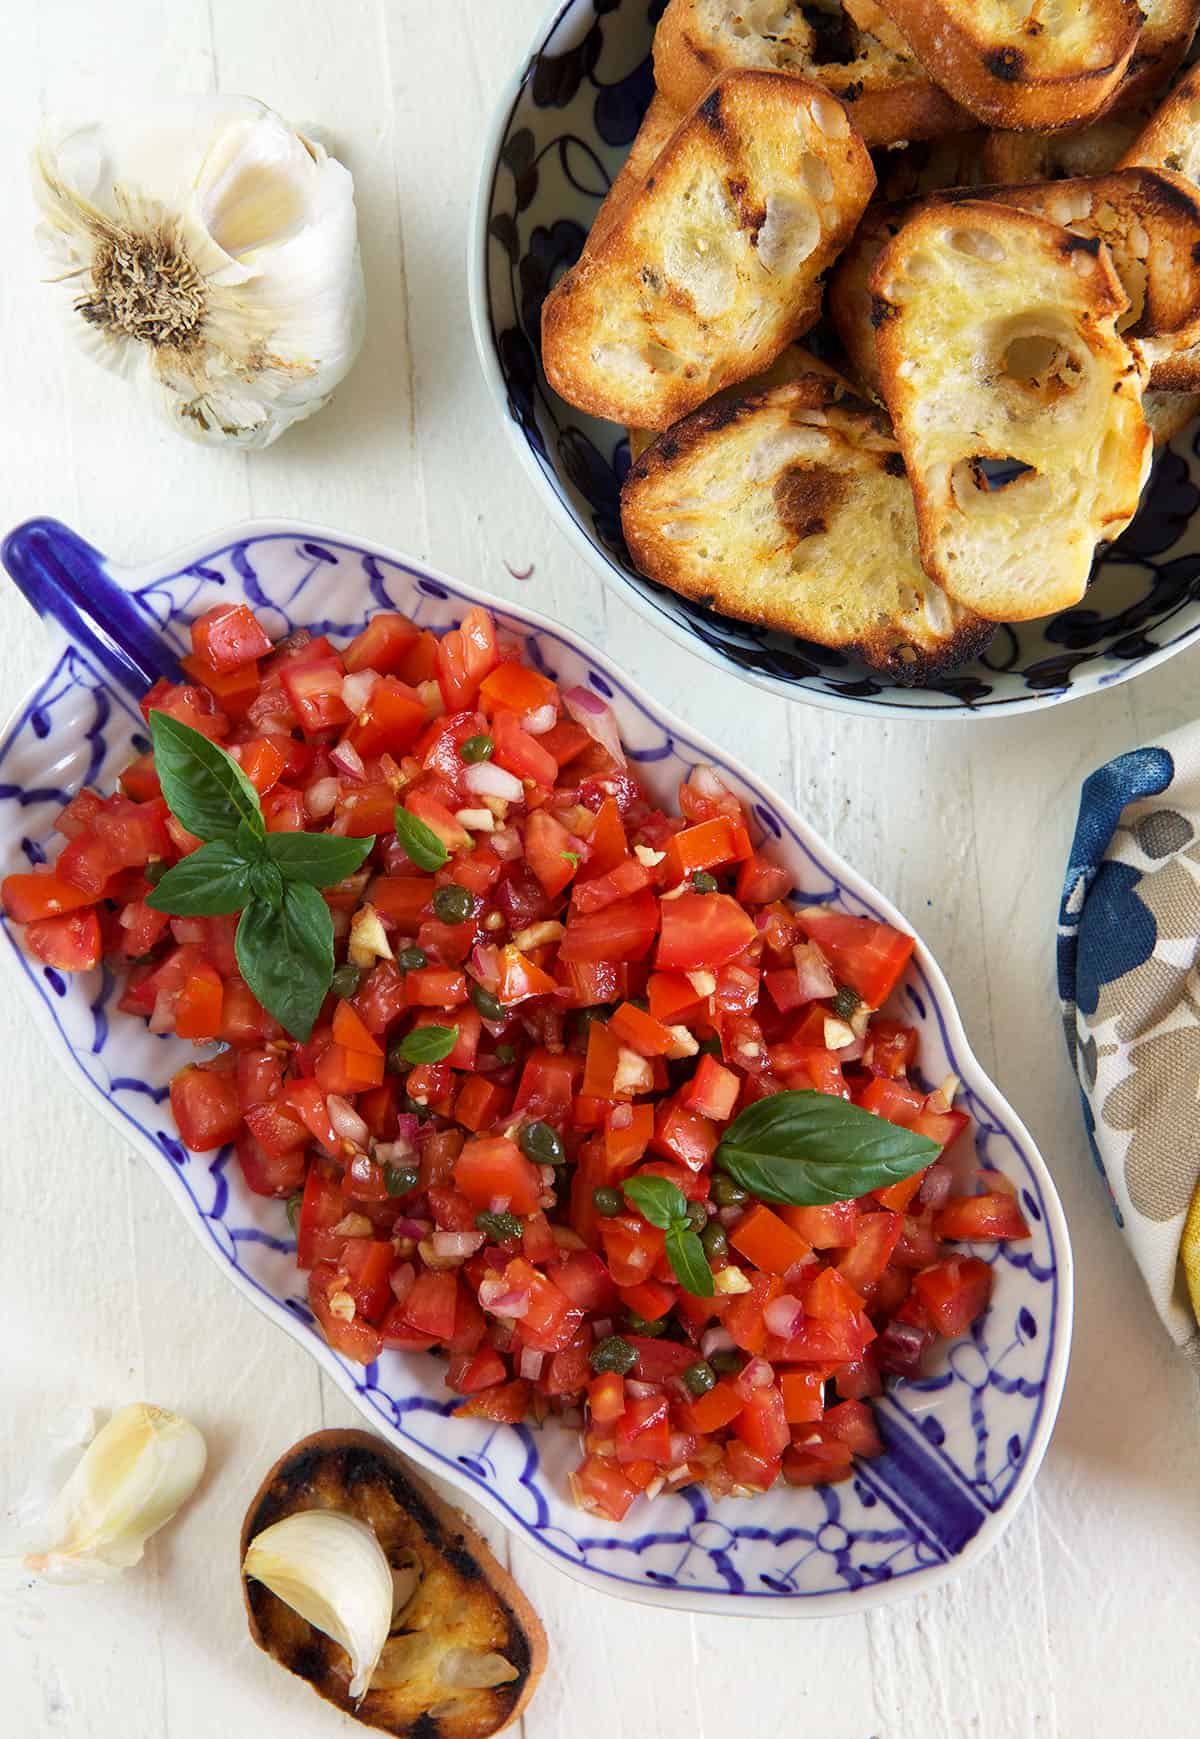 A large serving bowl of bruschetta is placed next to a bowl of toasted crostini.